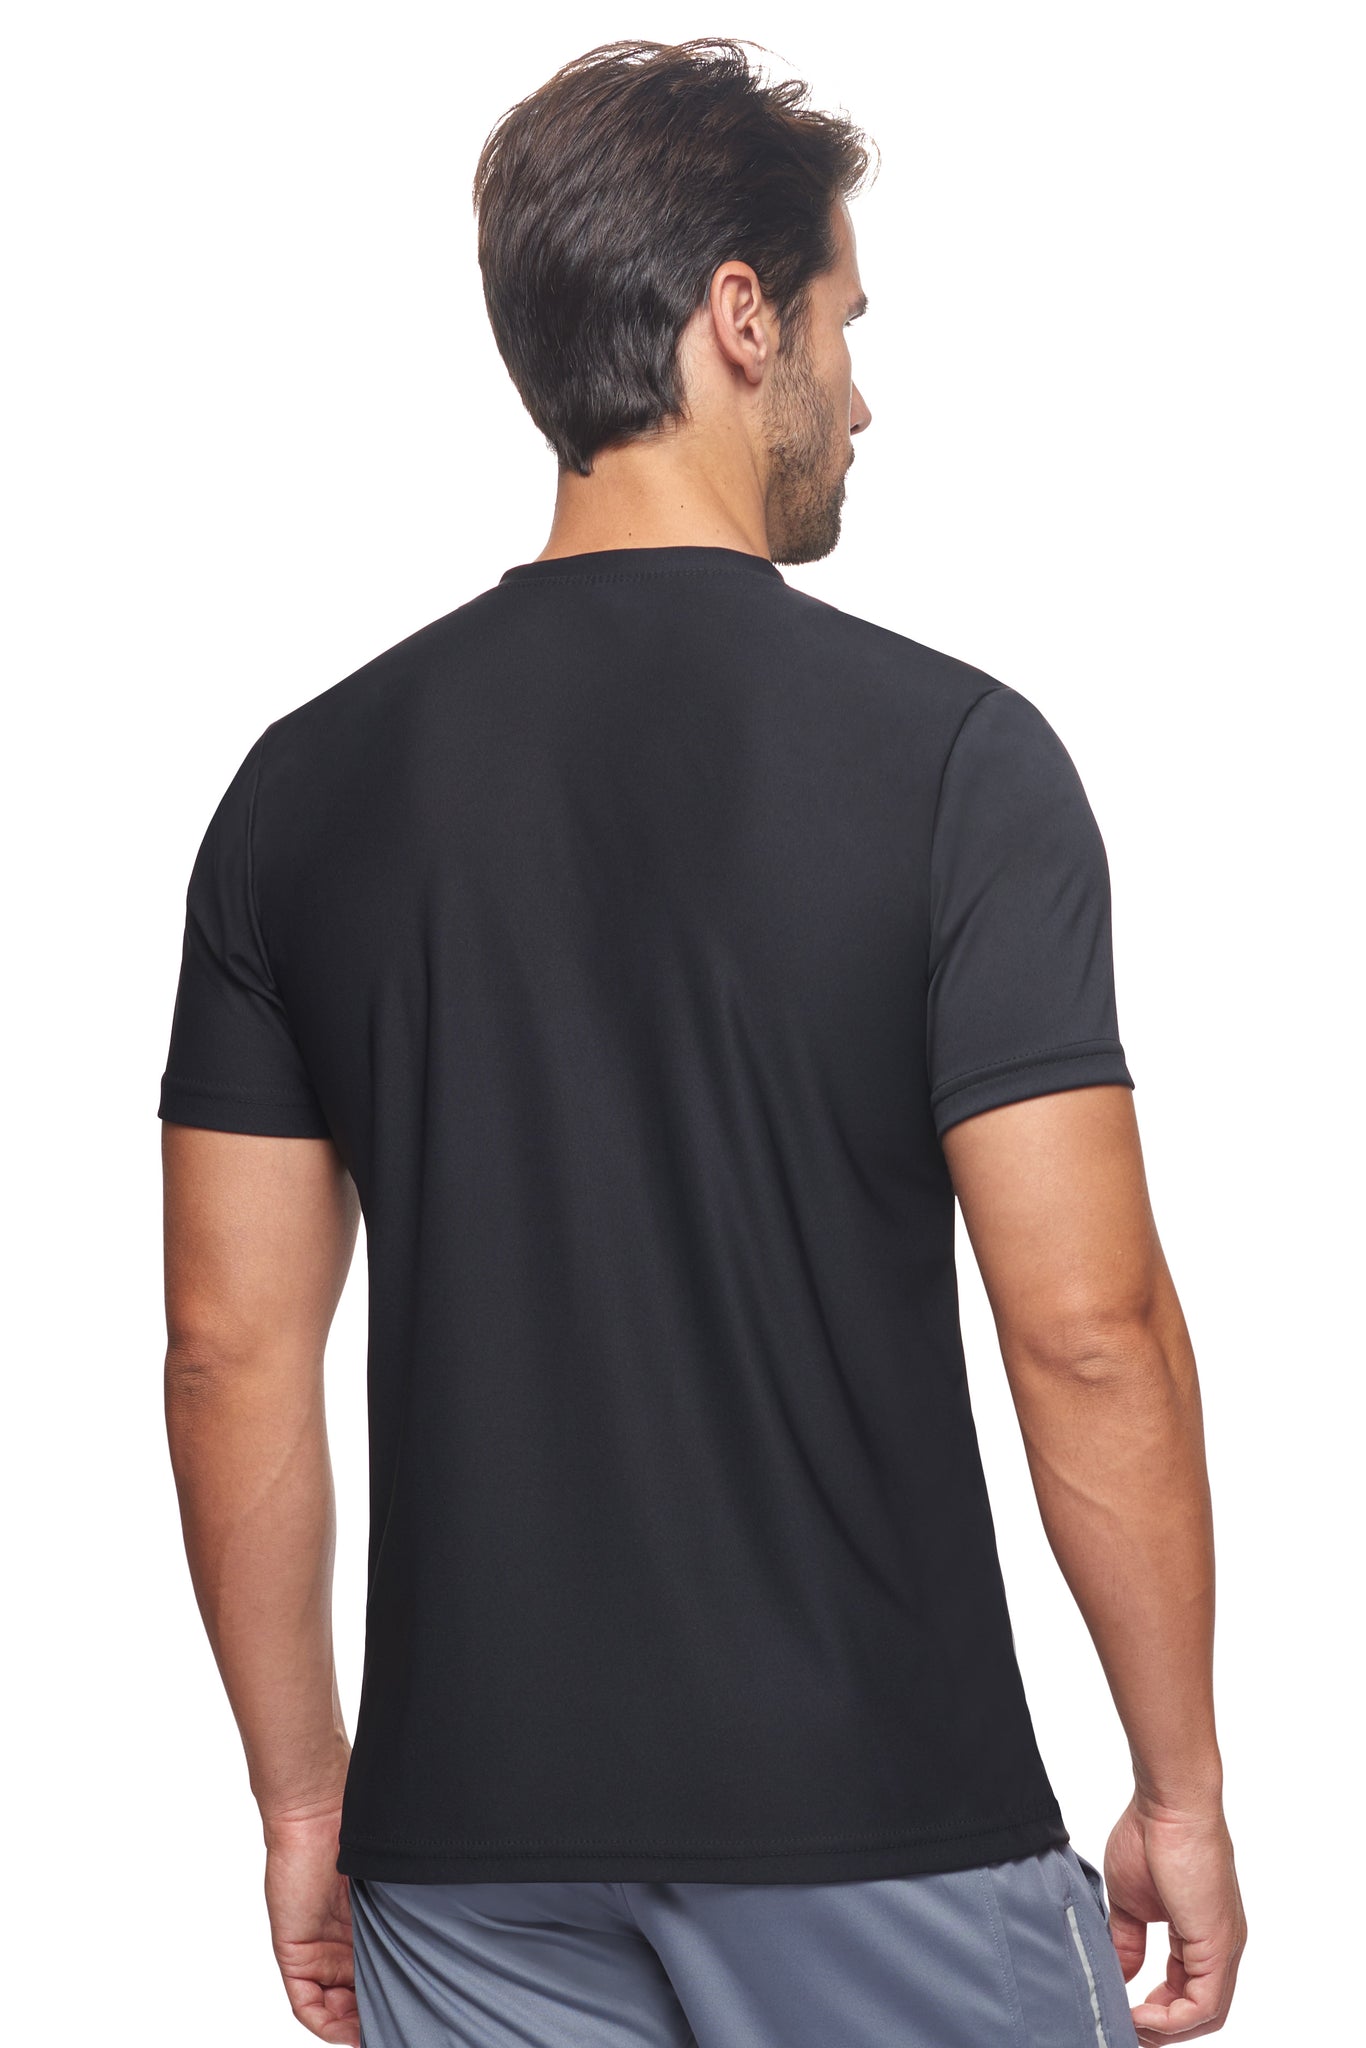 Expert Brand Wholesale Unisex Men Recycled Polyester REPREVE® T-Shirt Made in USA in black image 3#black